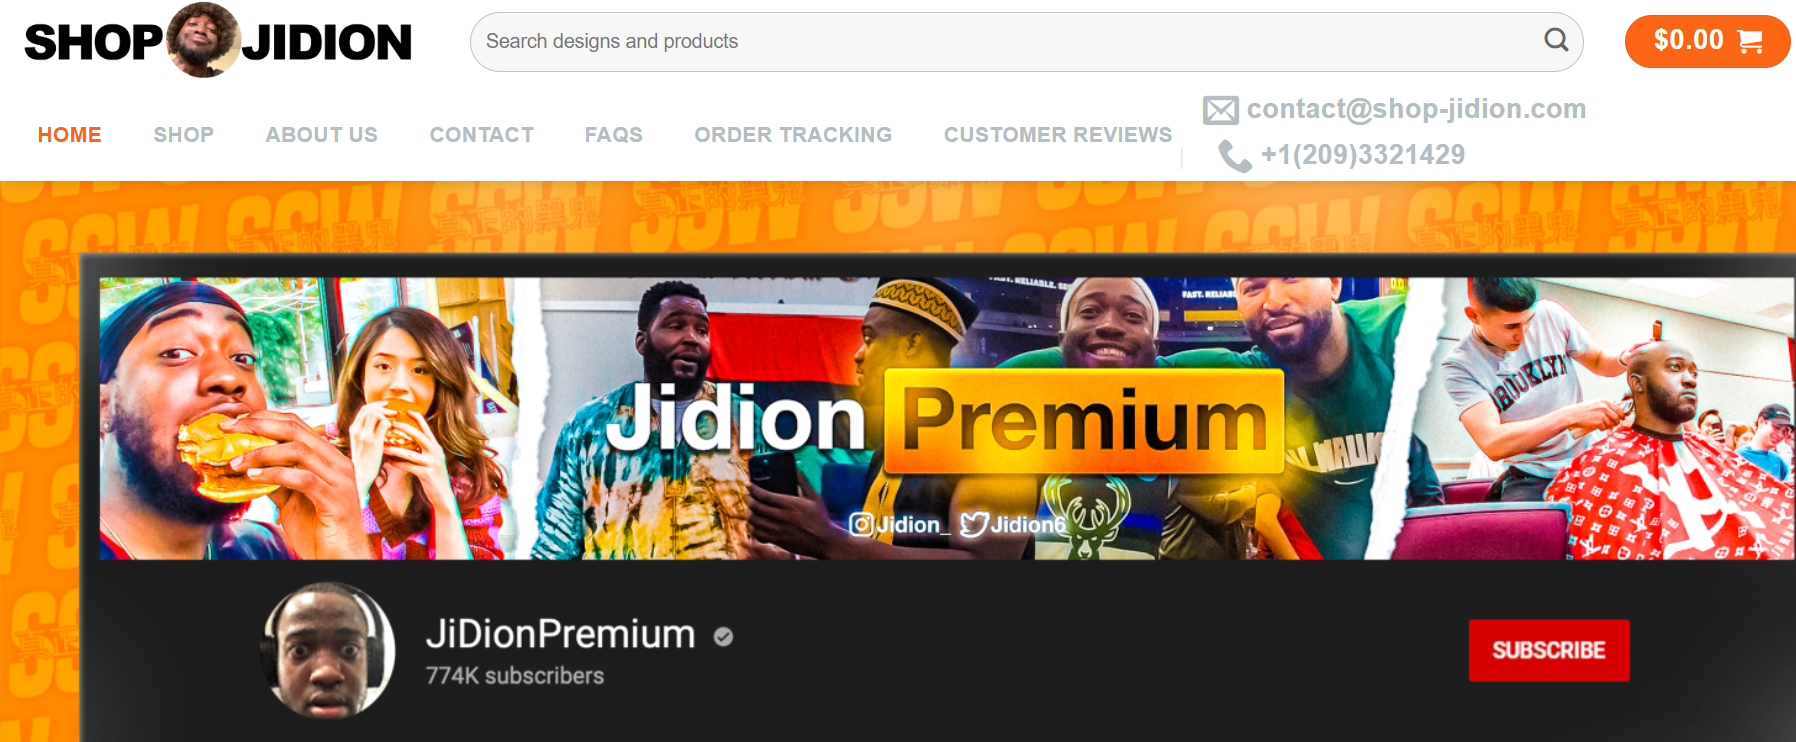 Jidion Official Store on Gab: 'Jidion Official Store - Official online shop Jidi…' - Gab Social